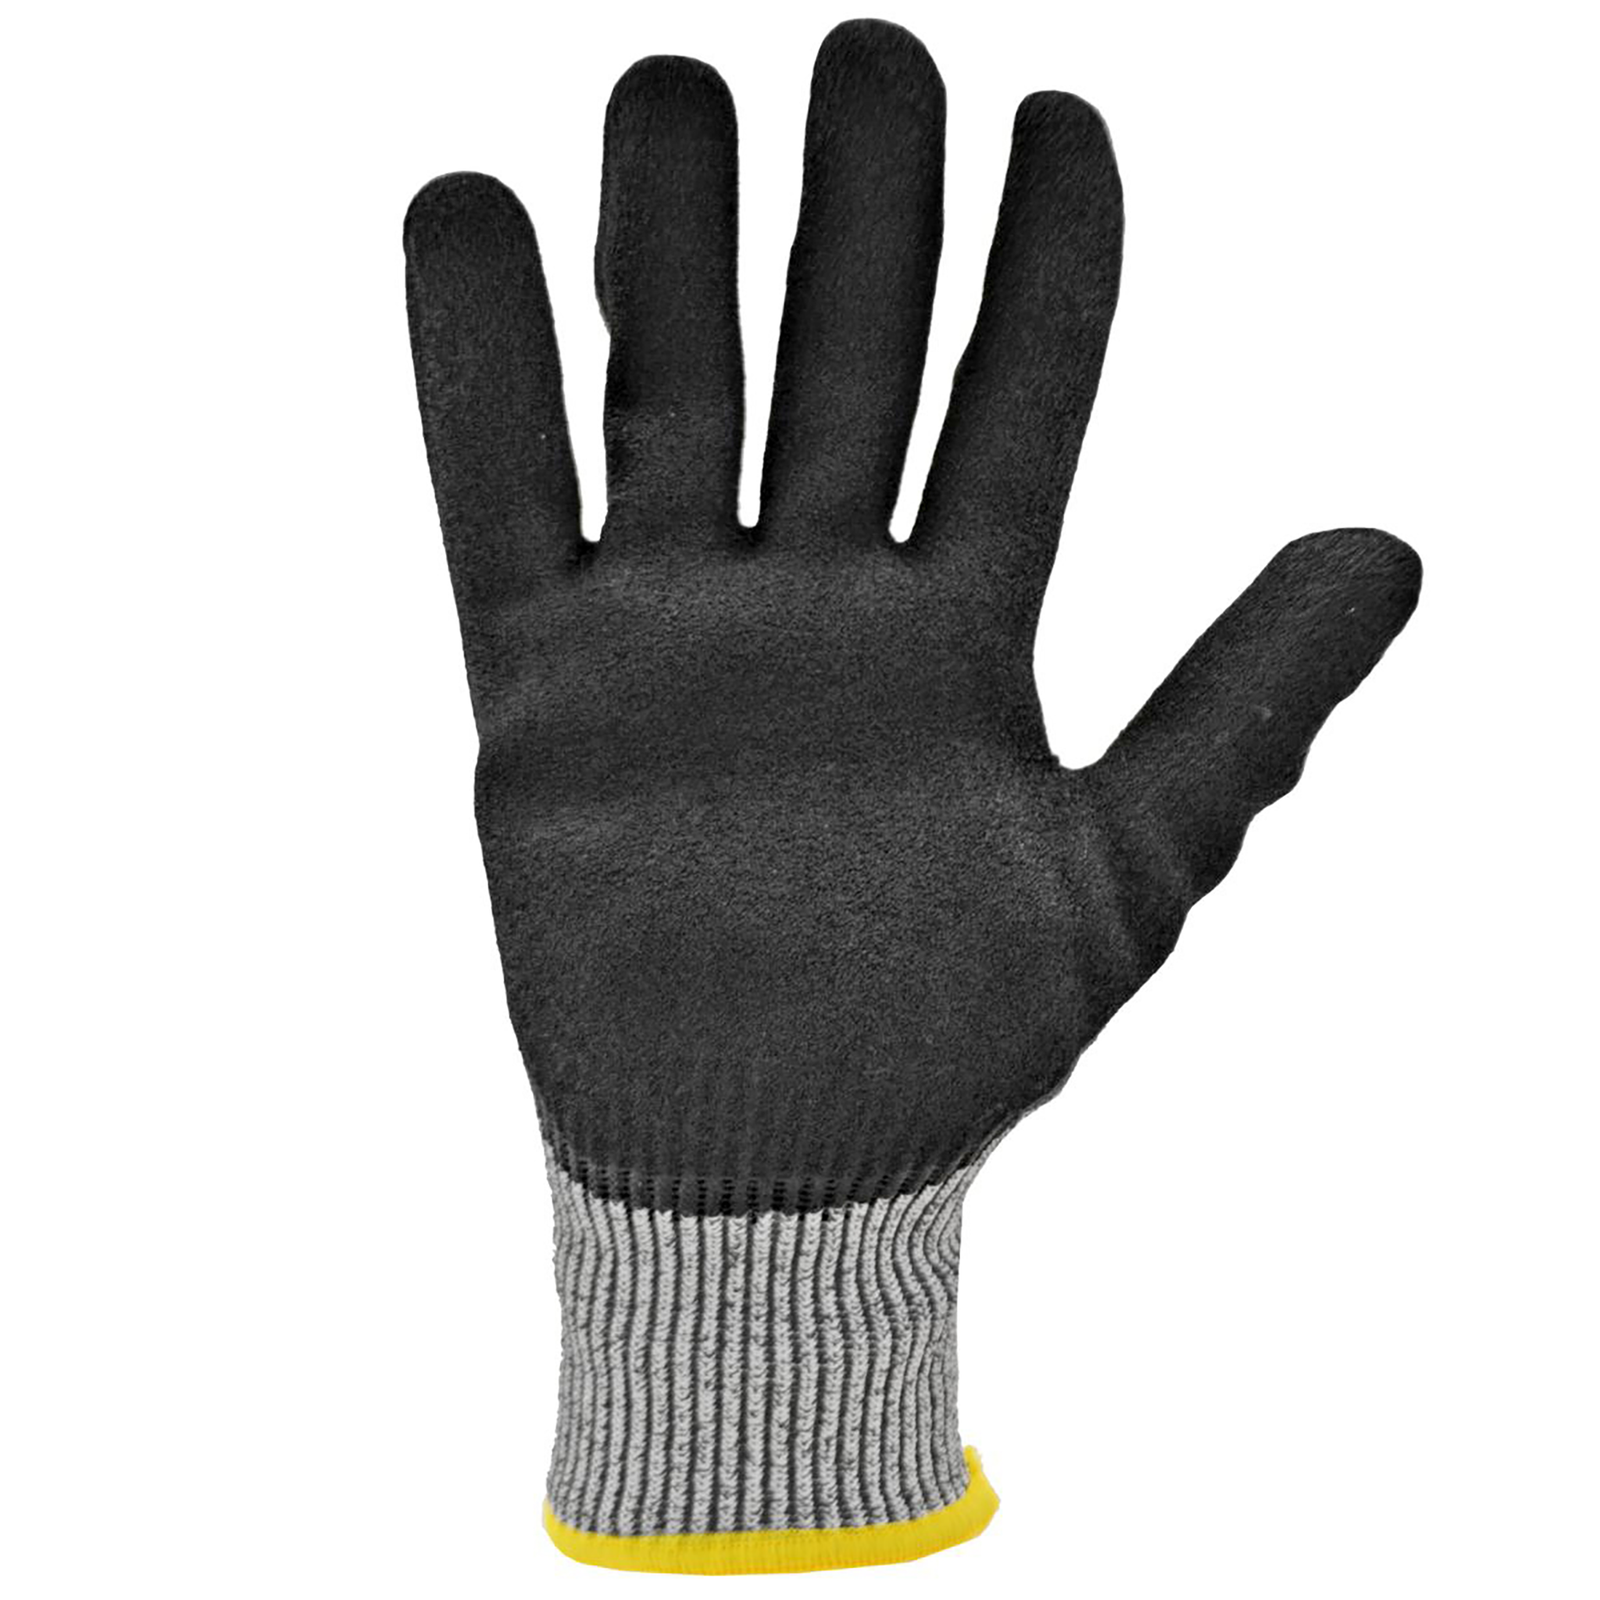 Palm of a cut resistant JORESTECH safety work glove with black nitrile dipped palm